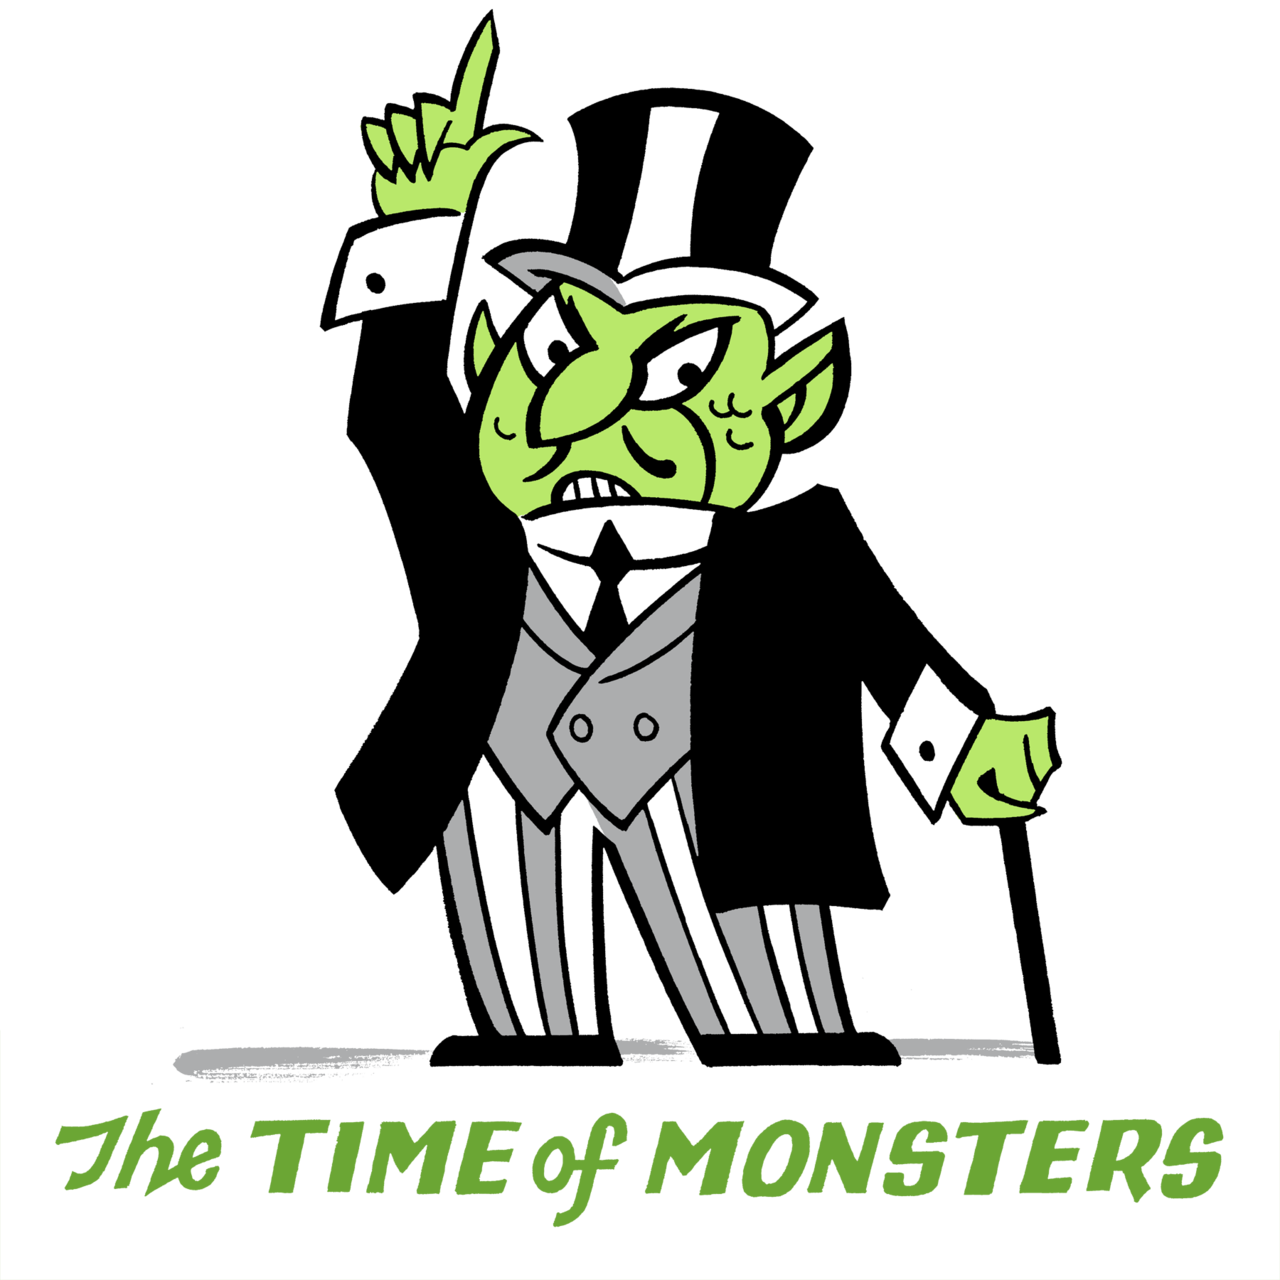 The Time of Monsters